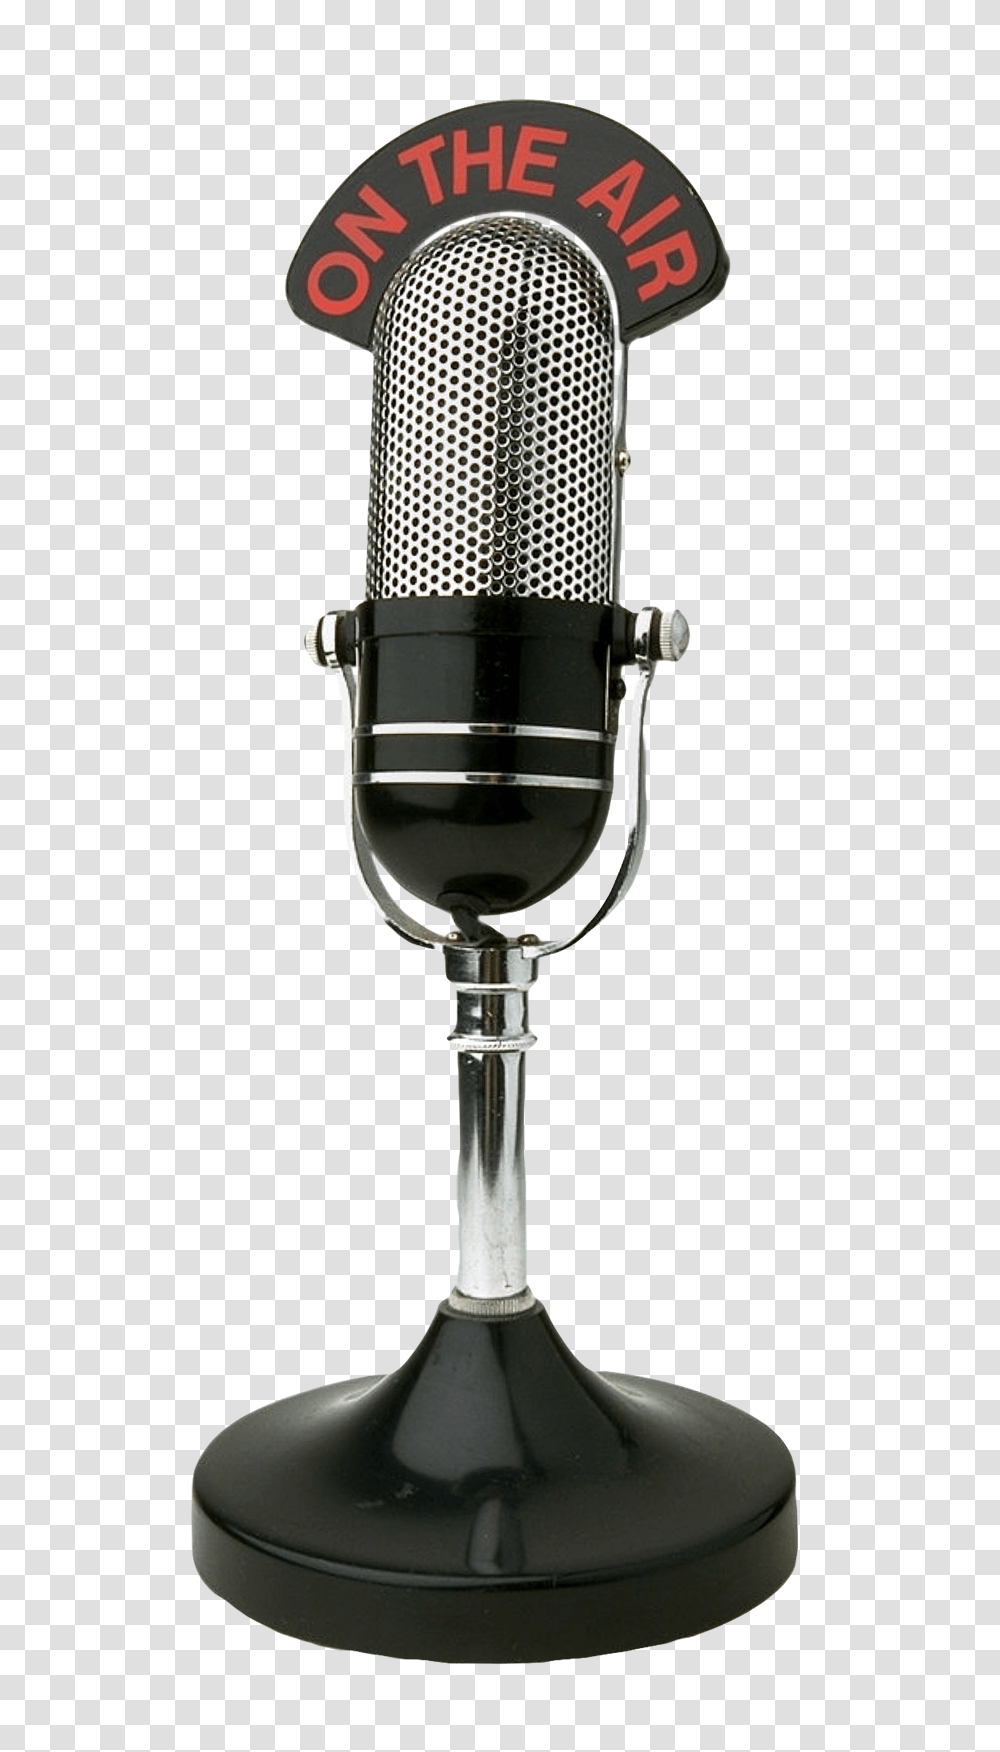 Download Free Microphone Image Dlpngcom Radio Mic, Electrical Device, Mixer, Appliance, Lamp Transparent Png